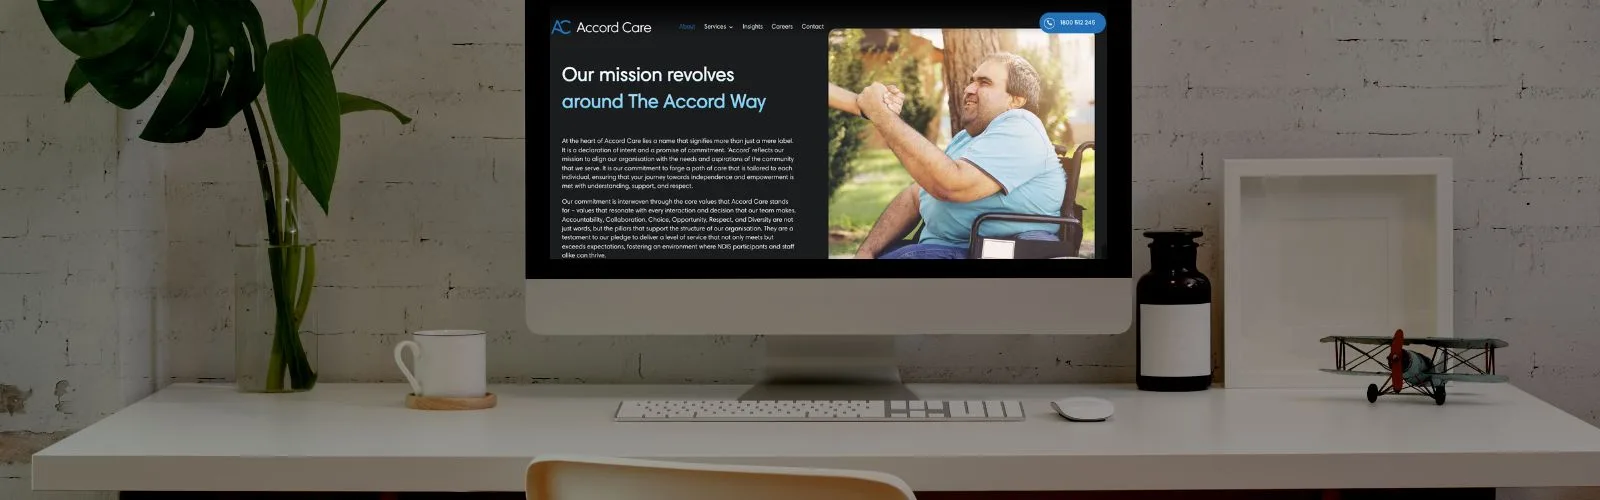 BeKonstructive Marketing’s Copywriting Project for Accord Care